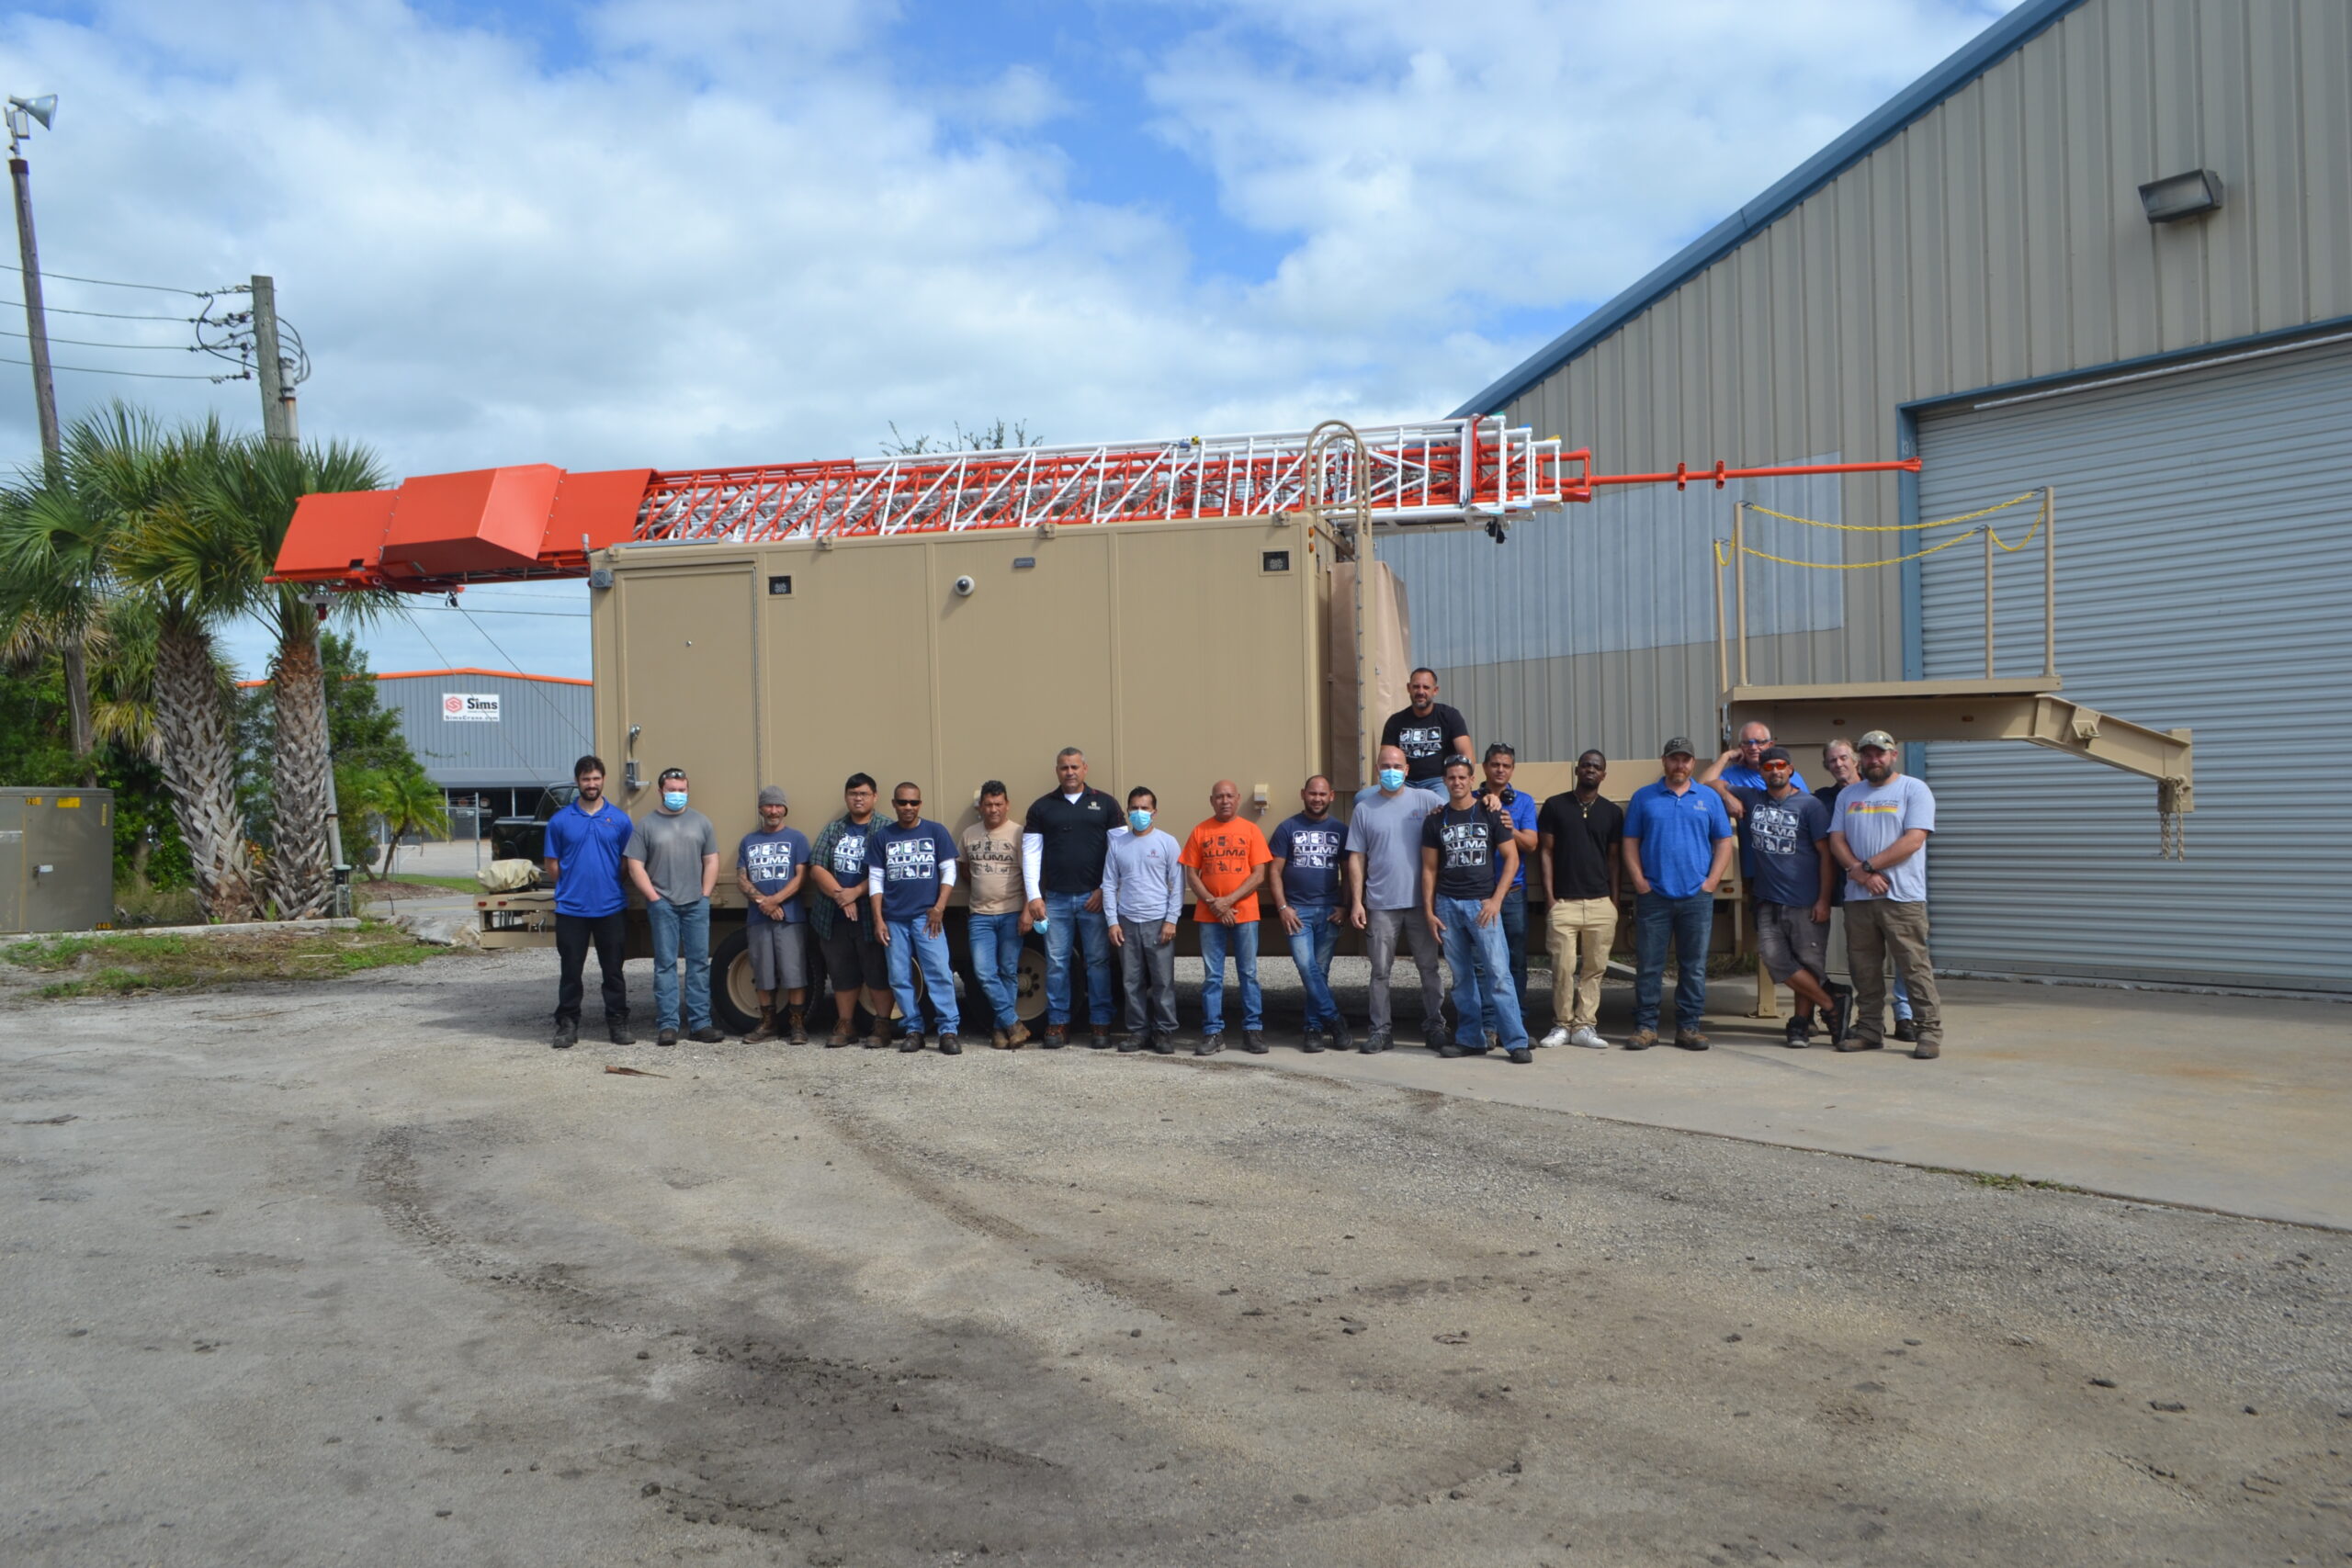 Aluma's Production and Manufacturing Employees Group 